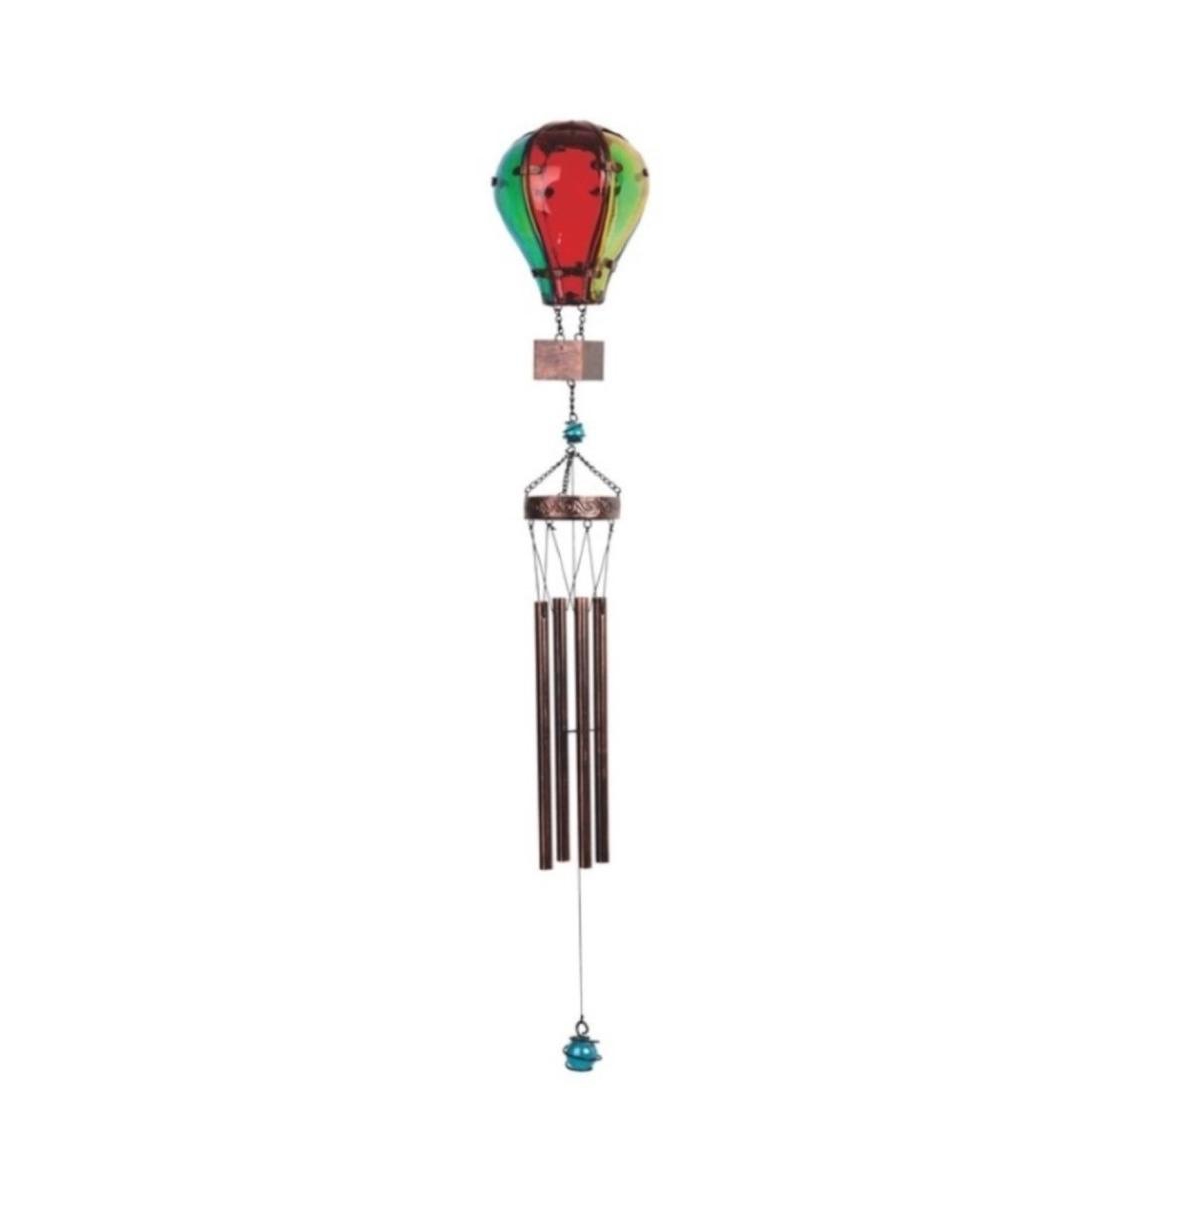 36" Long Color Glass Air Balloon Wind Chime Home Decor Perfect Gift for House Warming, Holidays and Birthdays - Multi